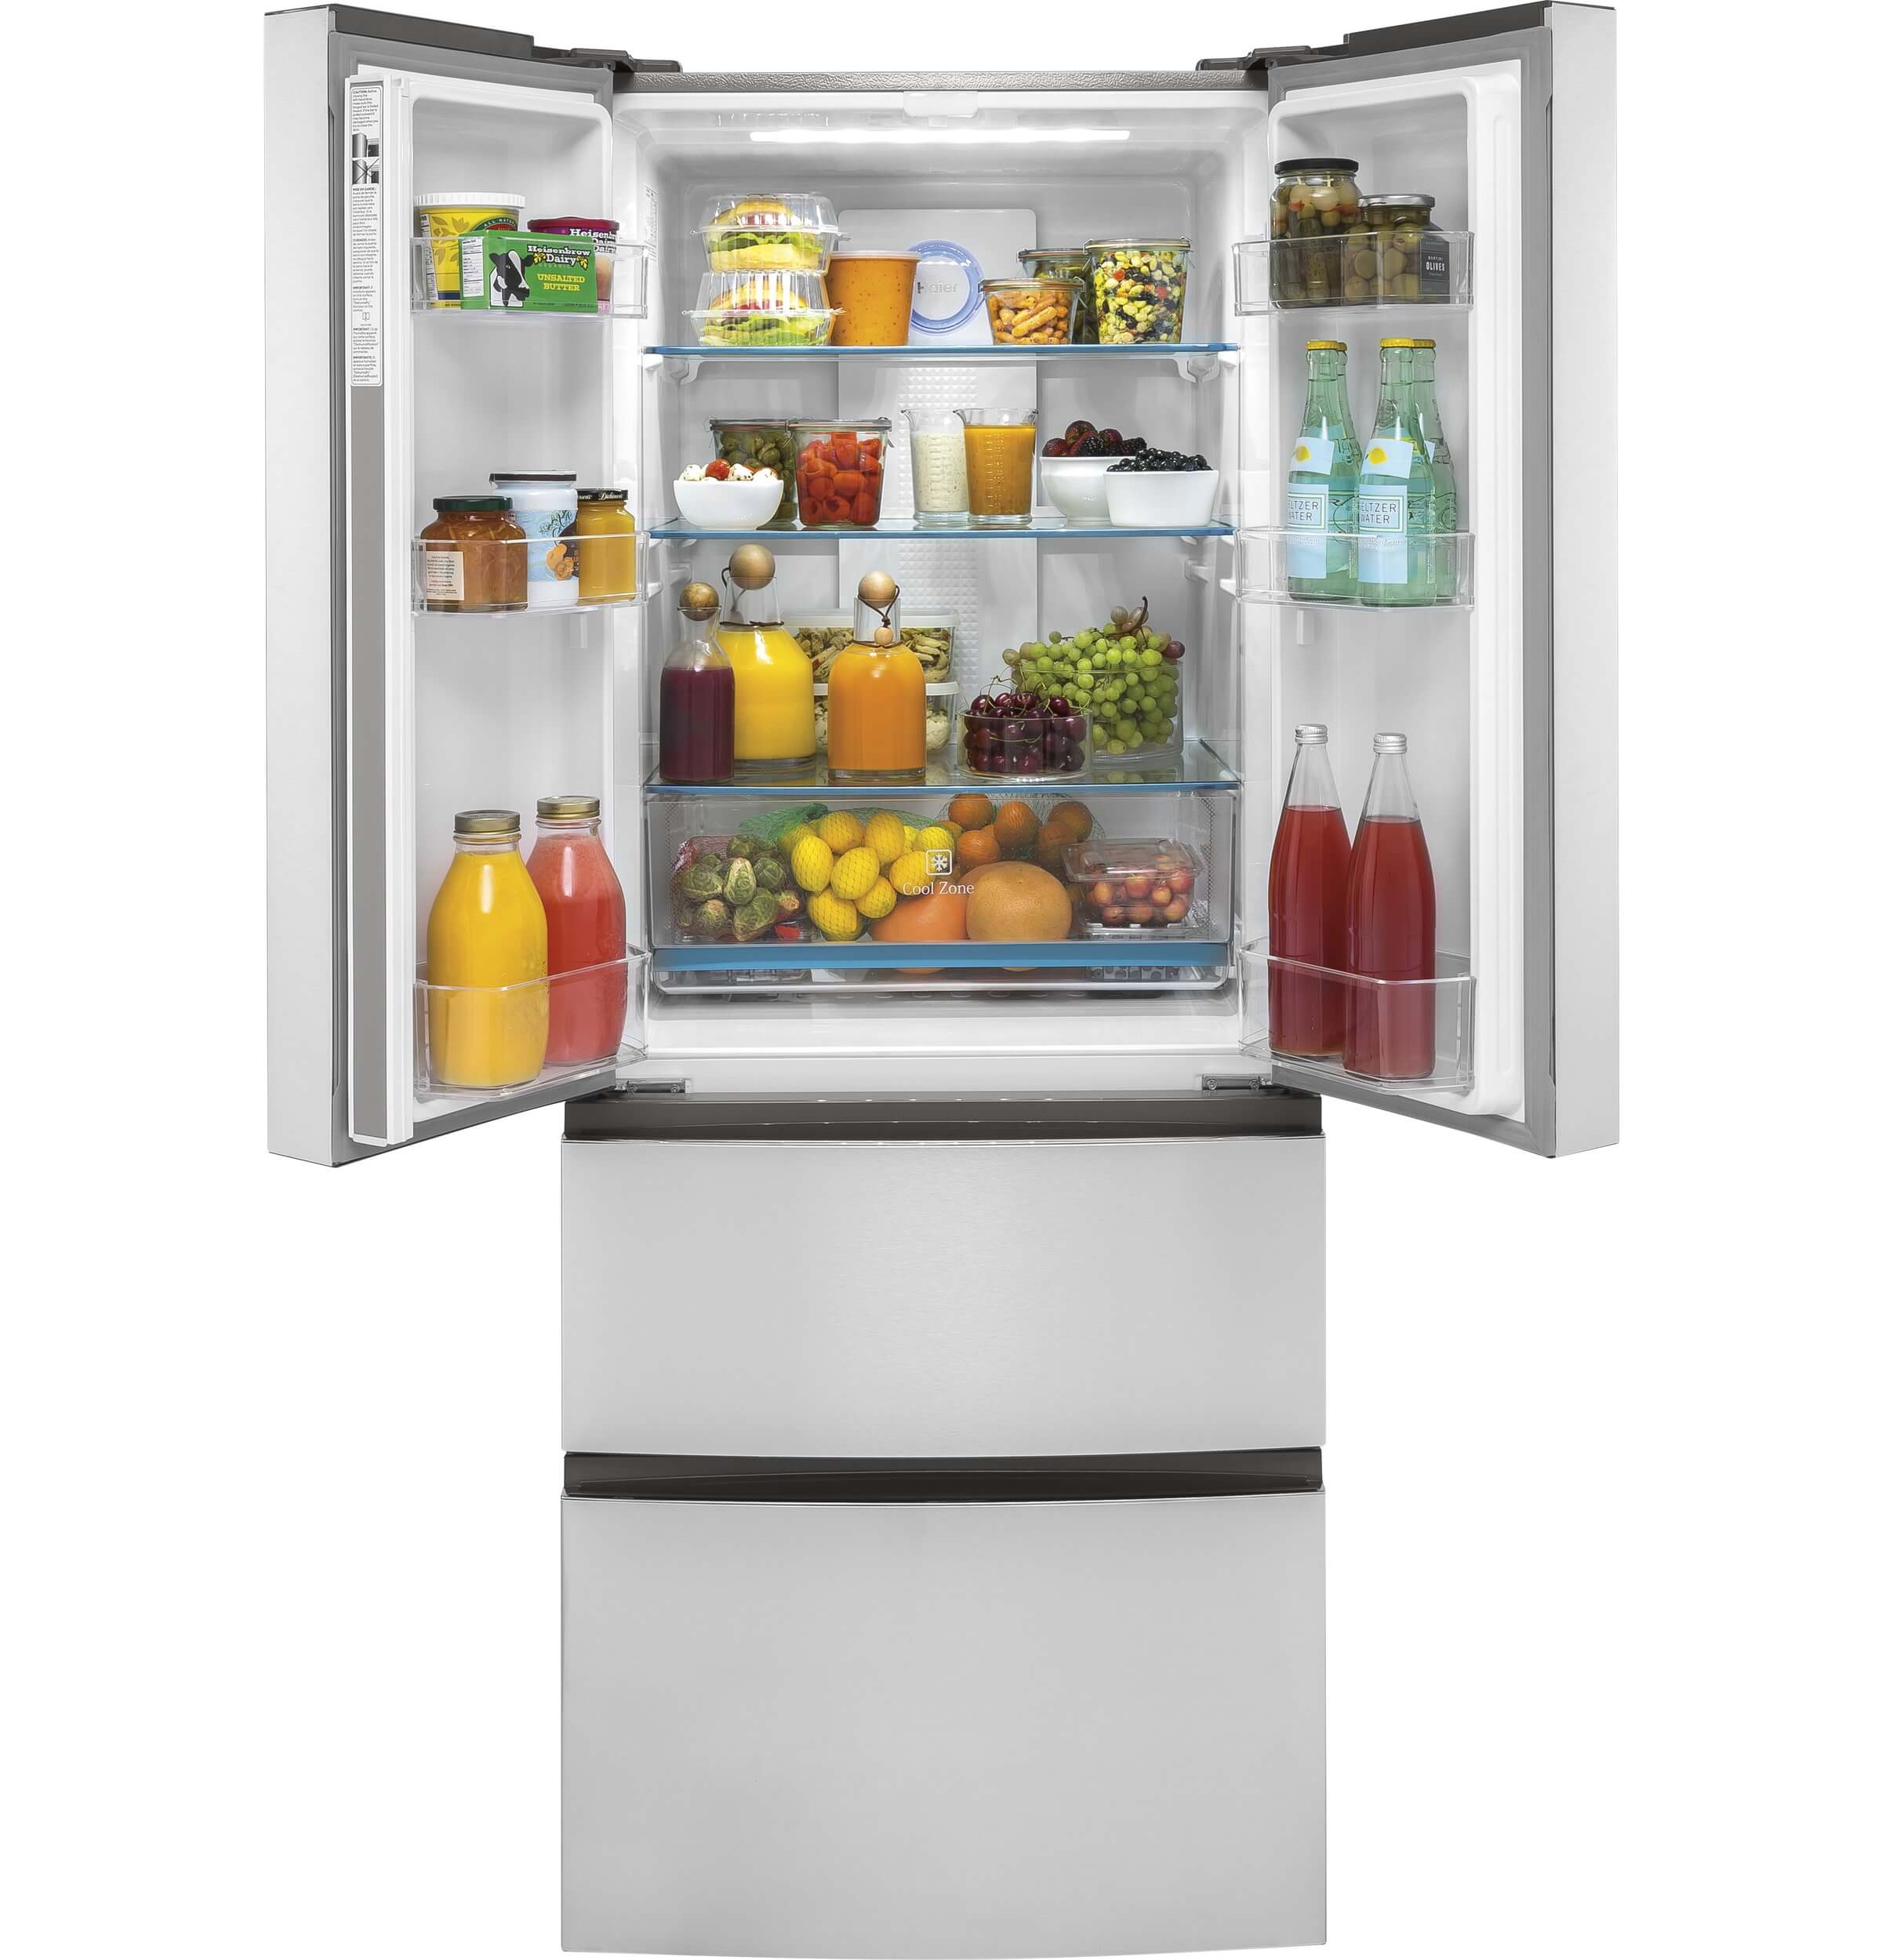 Haier HRF15N3AGS 15 Cu. Feet. Stainless French Door Refrigerator - image 2 of 7